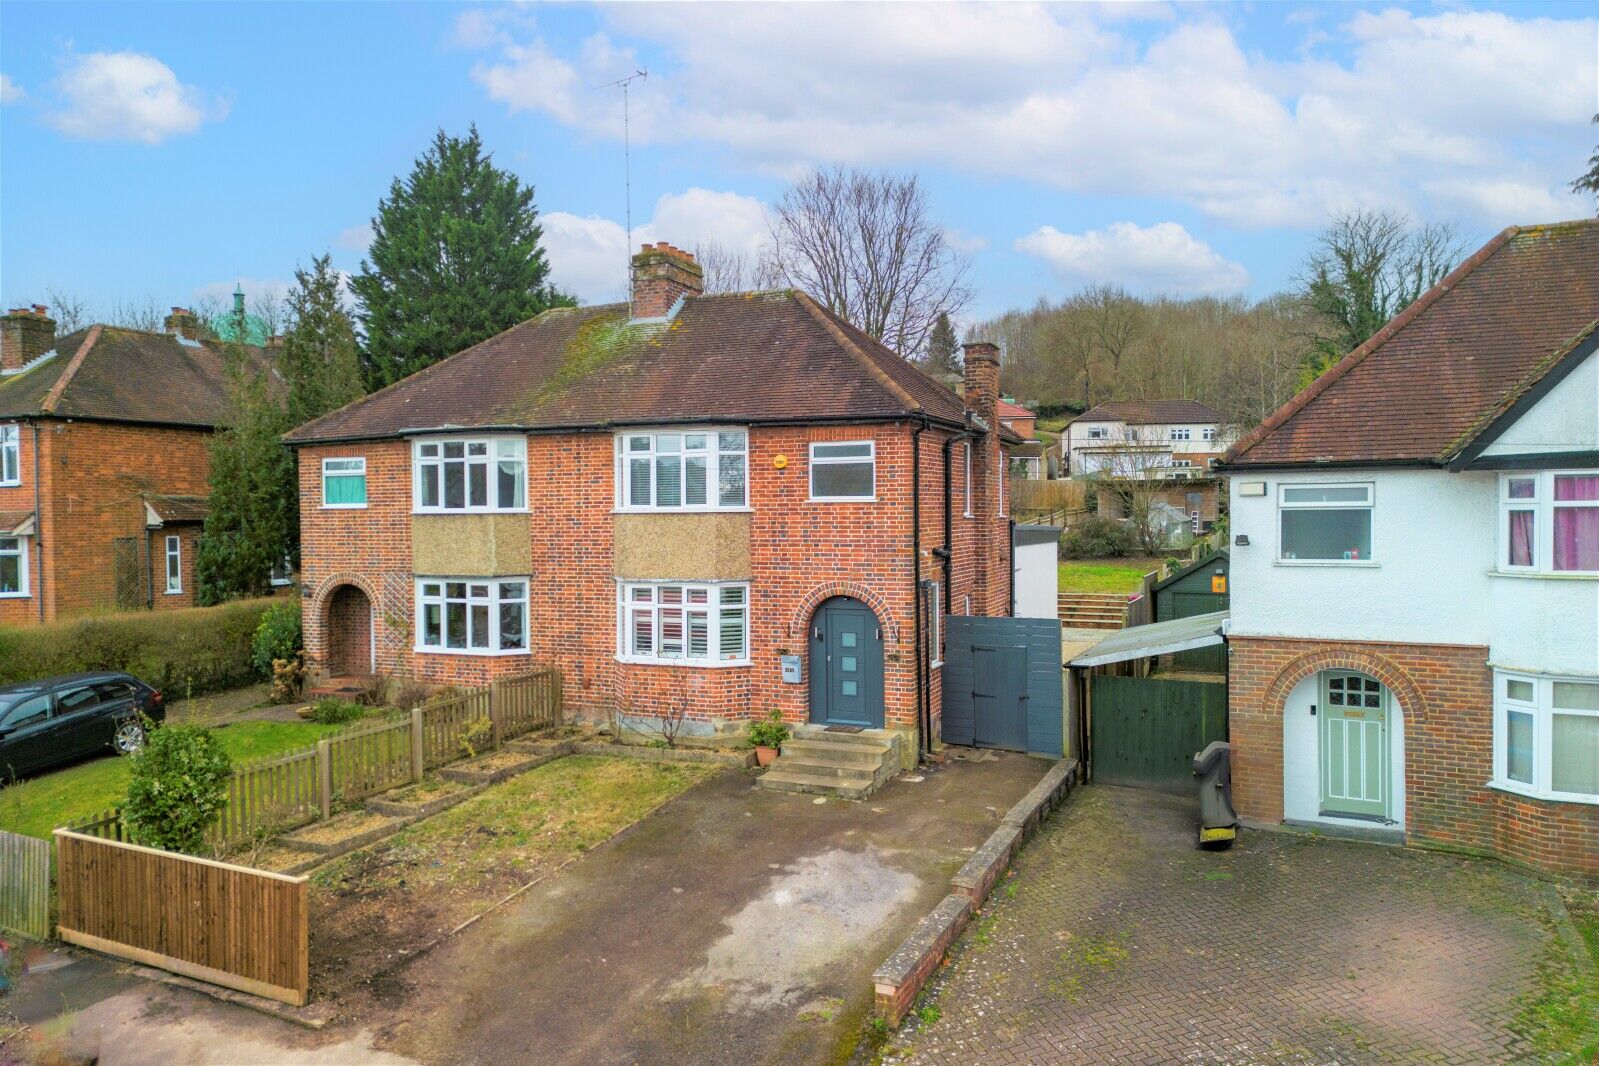 3 bedroom semi detached house for sale Eaton Avenue, High Wycombe, HP12, main image